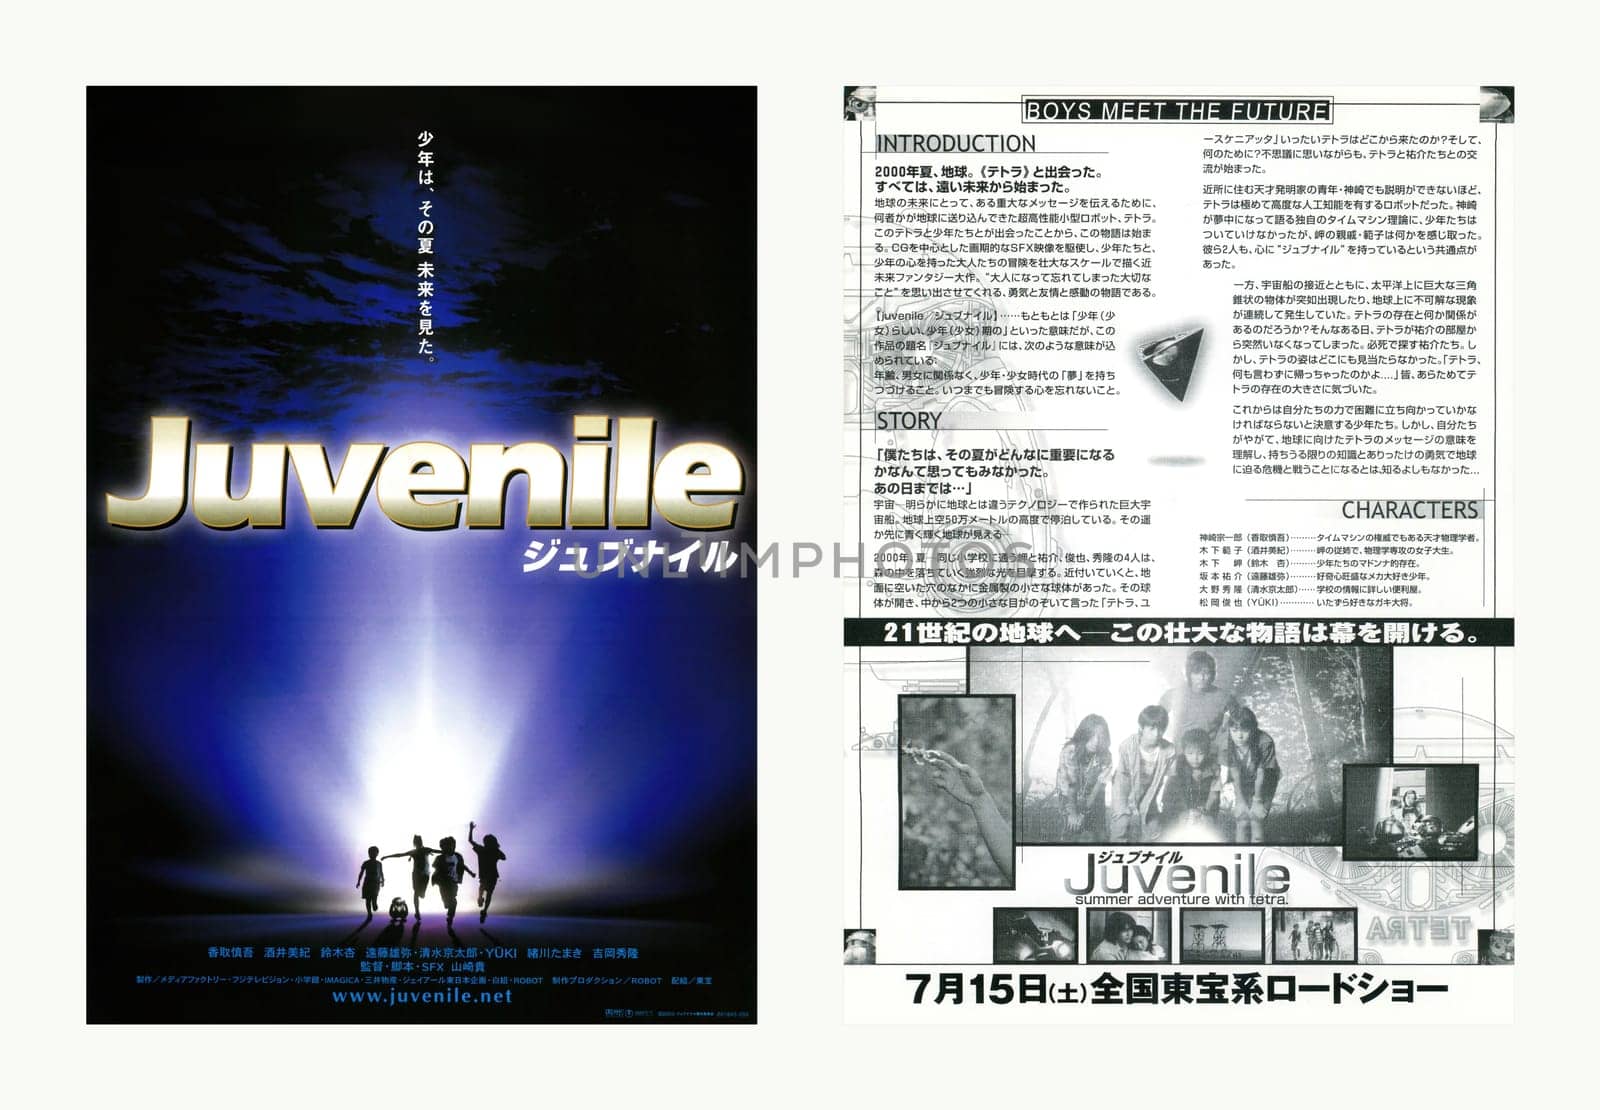 tokyo, japan - jul 15 2000: 1st teaser visual design double sided leaflet inspired by Steven Spielberg and created for the 1st movie "Juvenile" by Oscar-winning director Takashi Yamazaki (left: front)